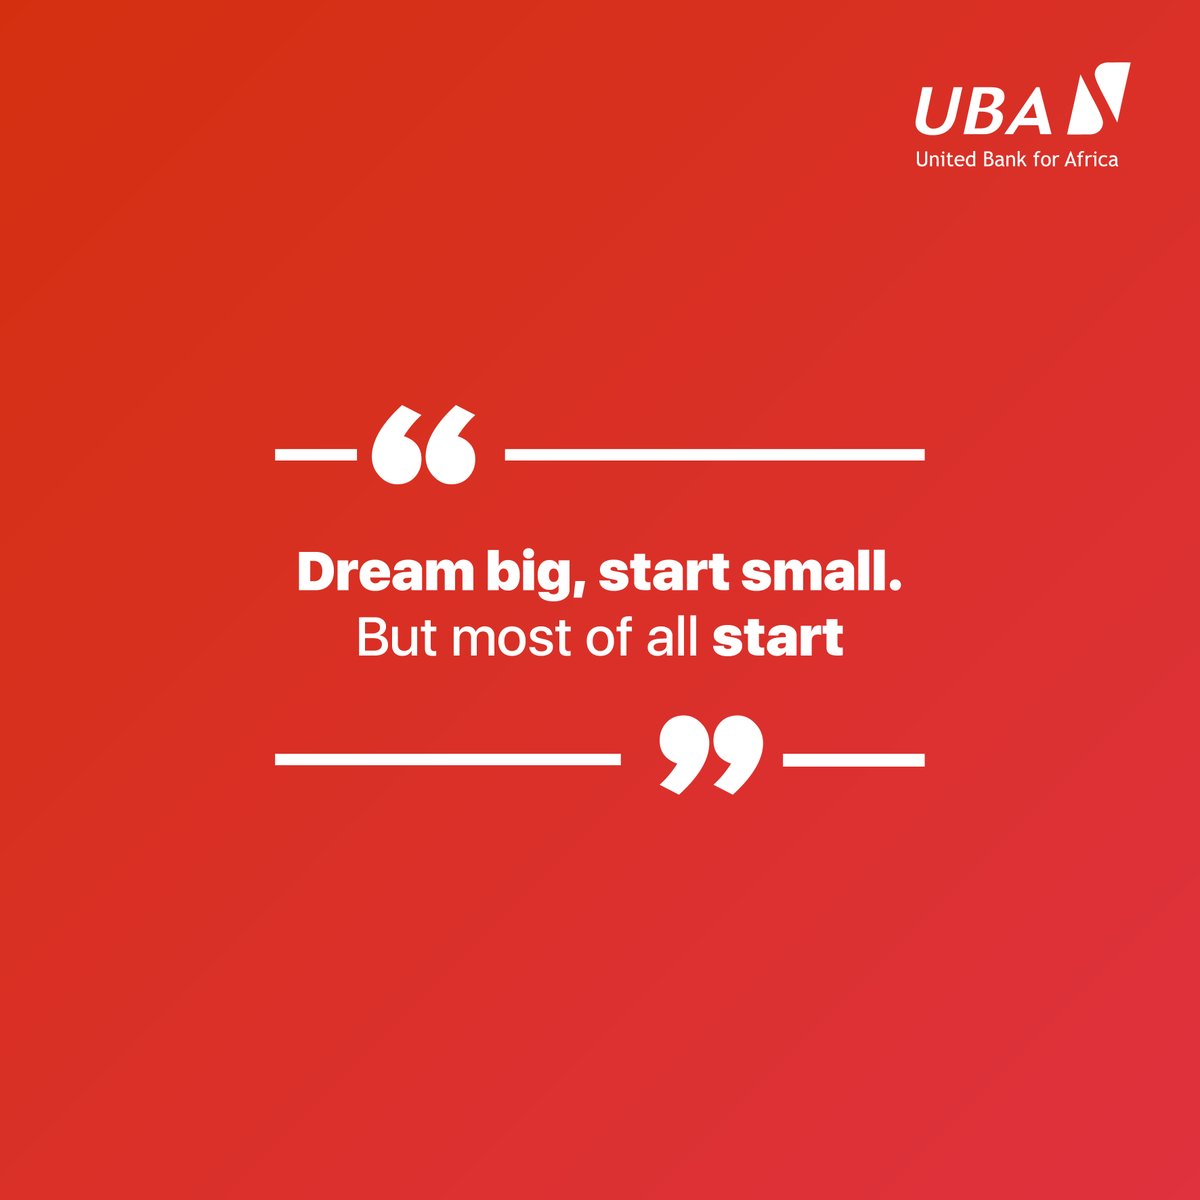 Dream big, start small. But above all, start. Every great journey begins with a single step. What are you waiting for? #DreamBig #StartNow